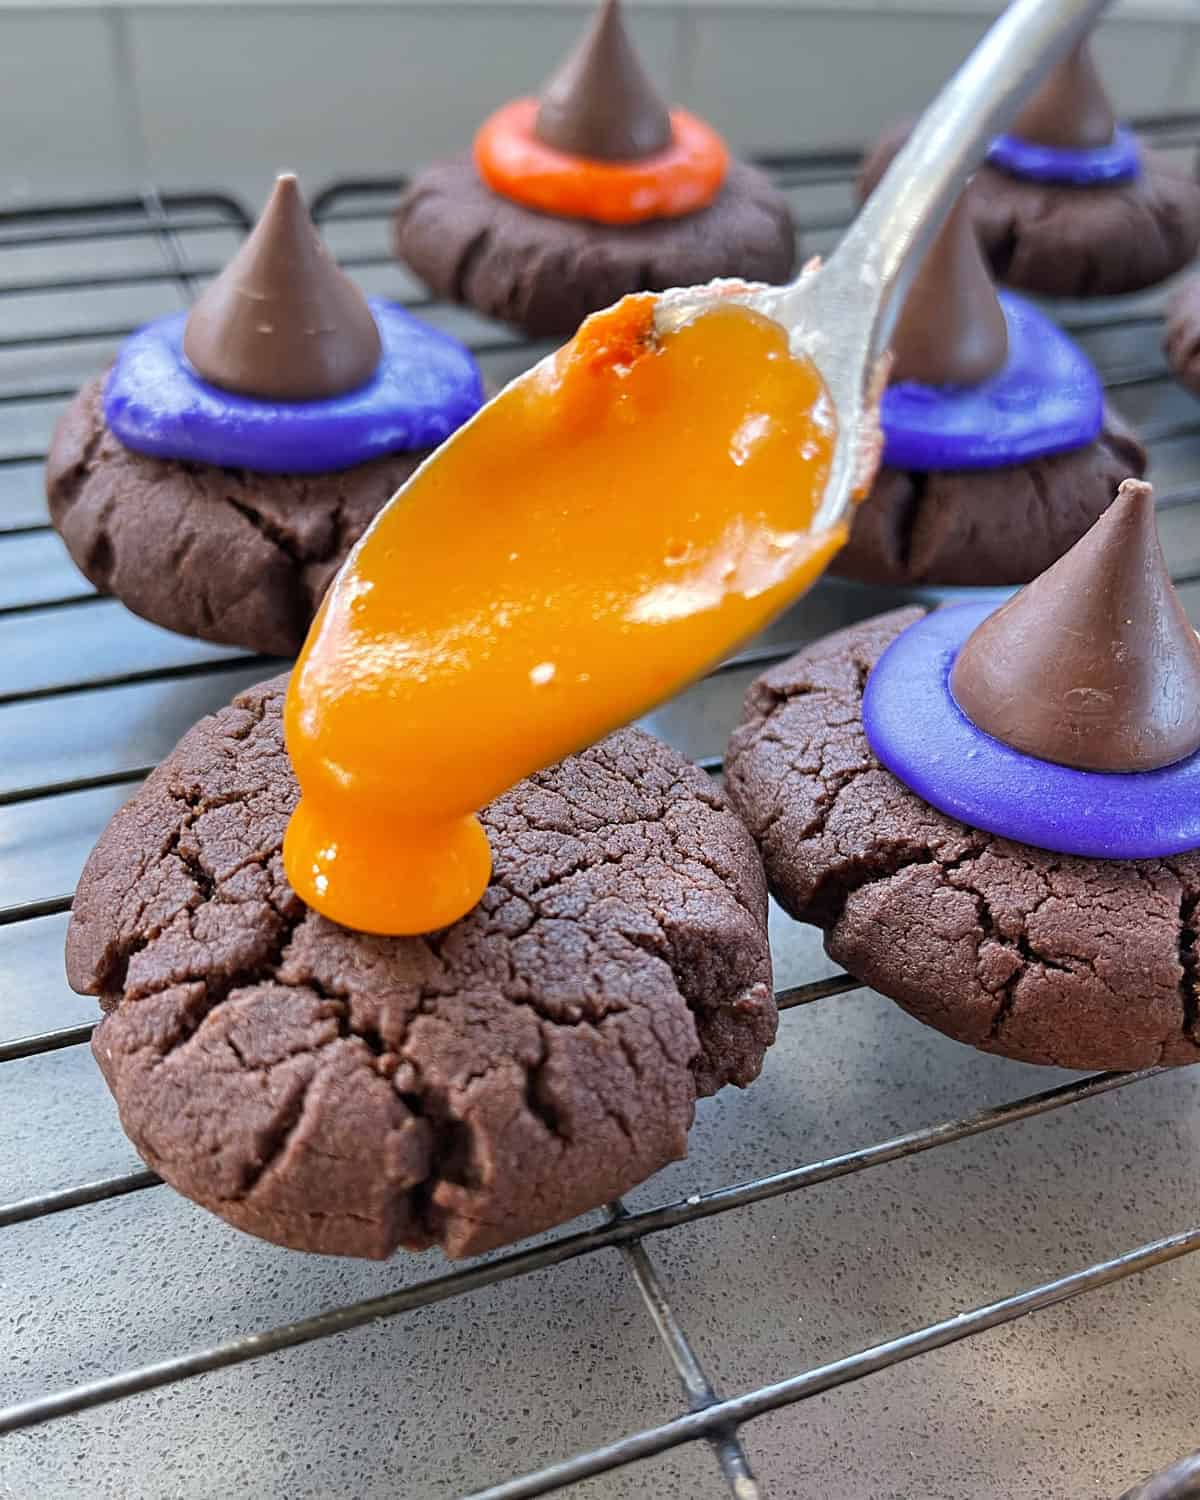 Orange icing being spooned on to a chocolate cookie